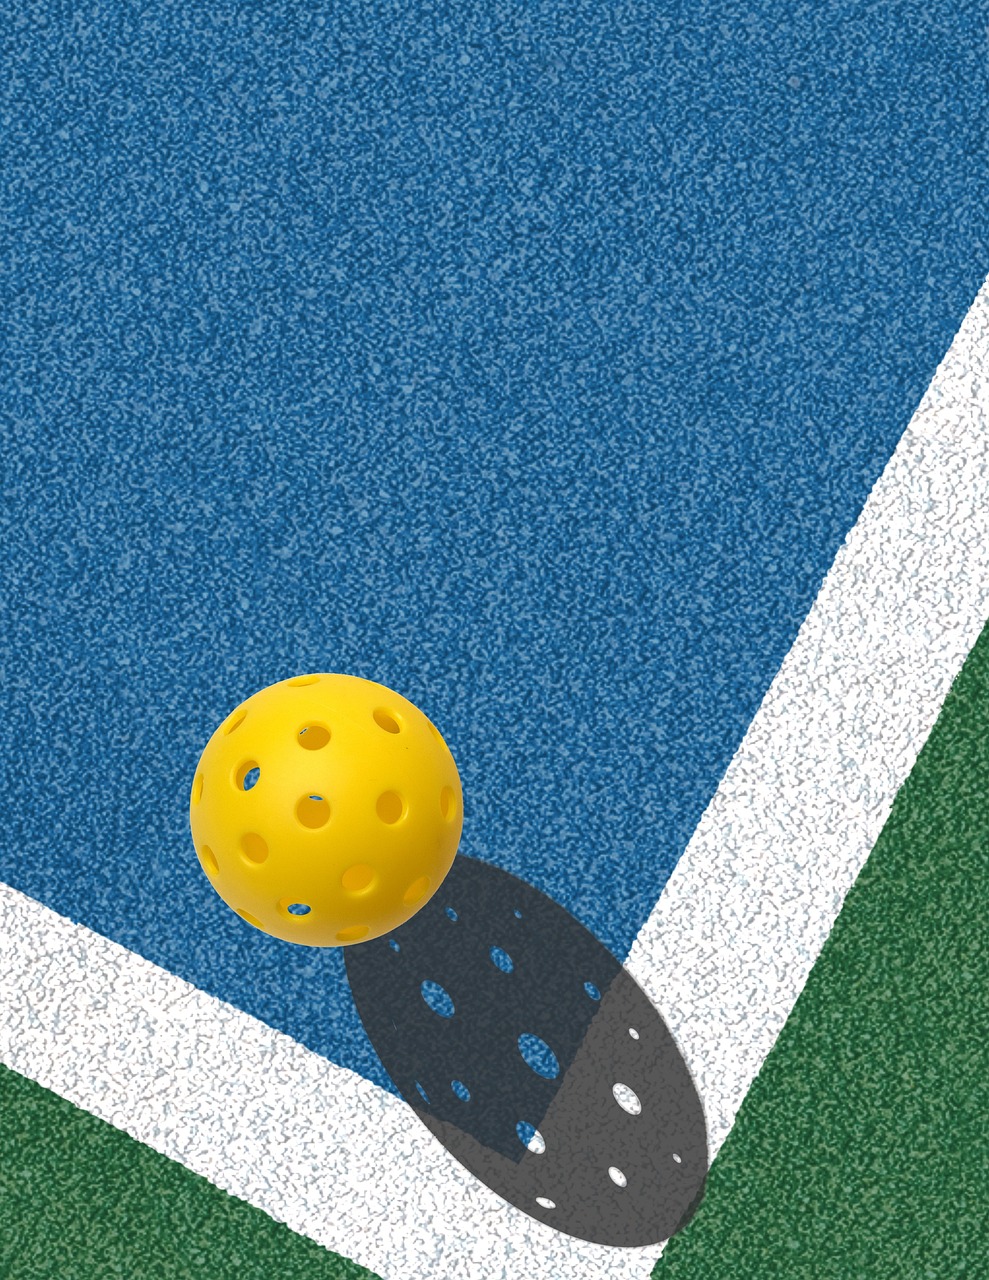 Image of a Pickleball